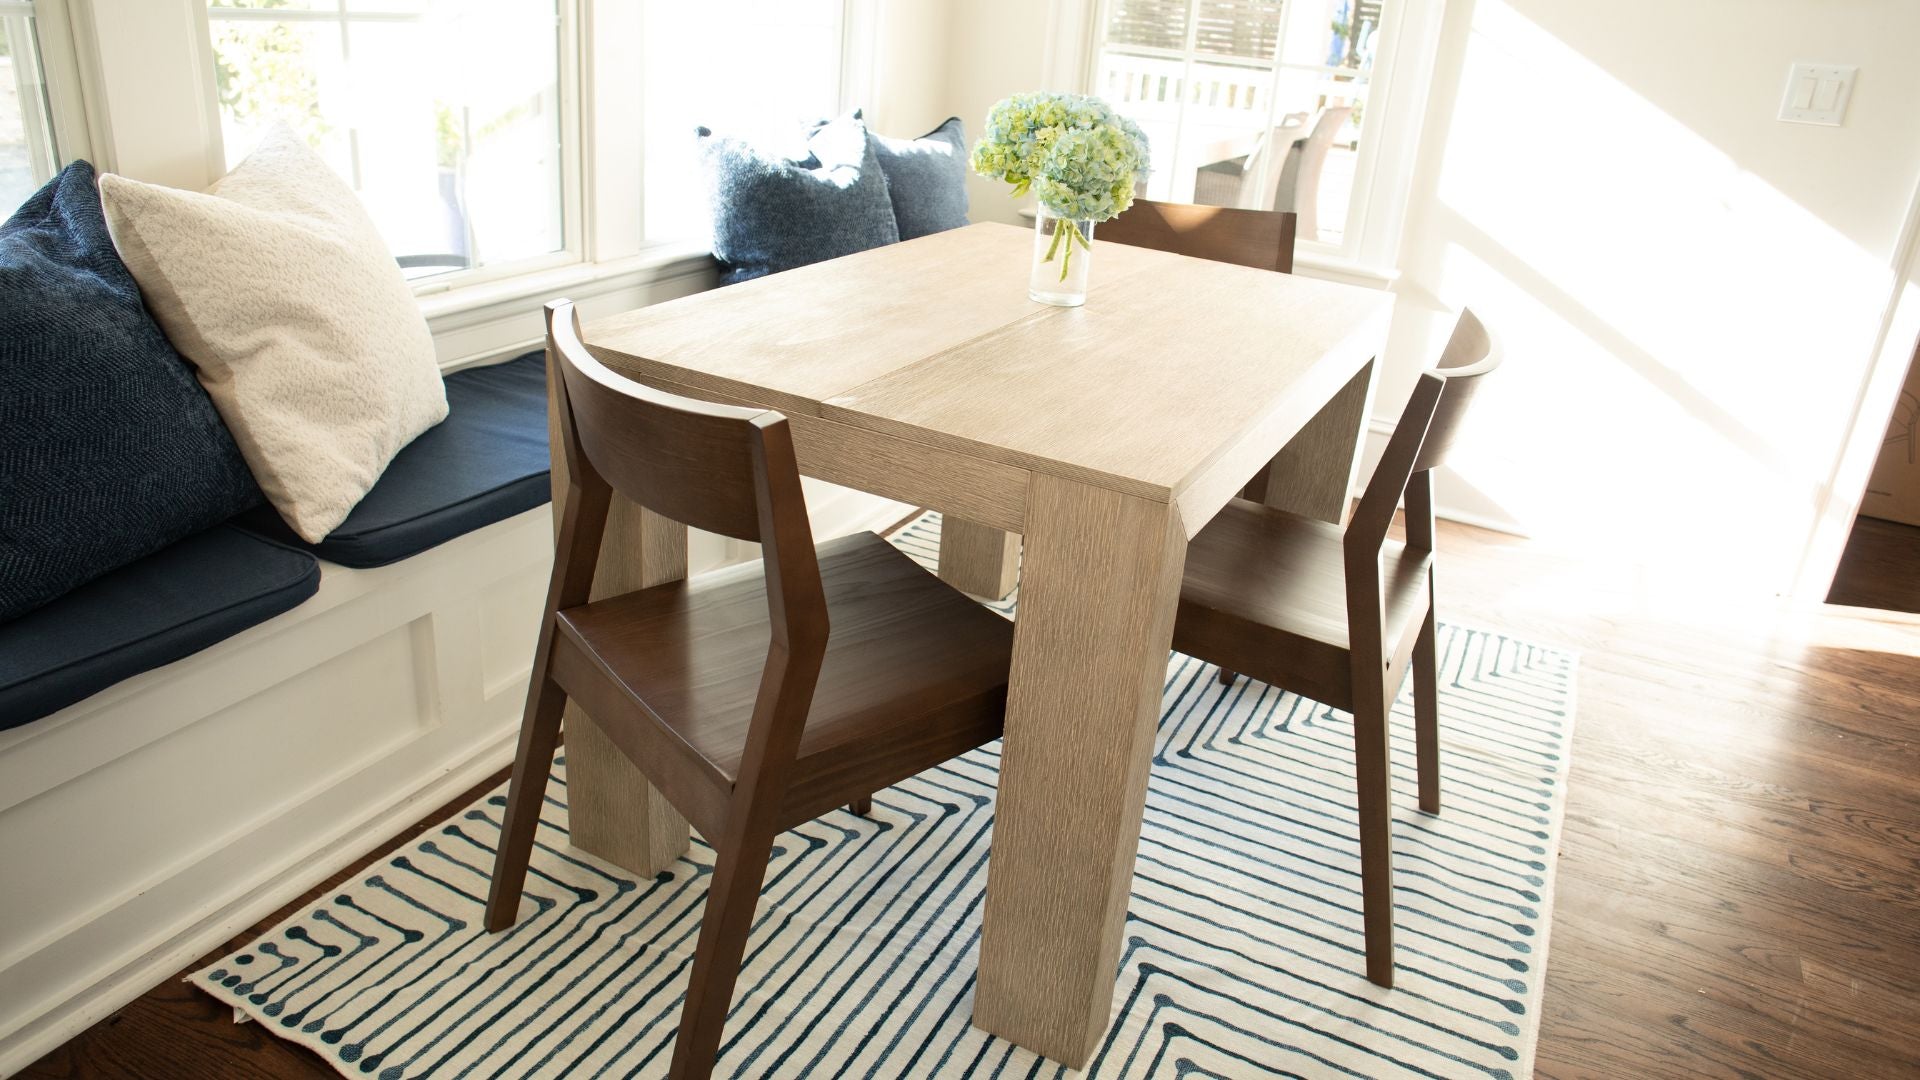 Solid wood modern dining table in seashell with solid wood dining chairs in walnut, banquette, striped rug, and floral centerpiece